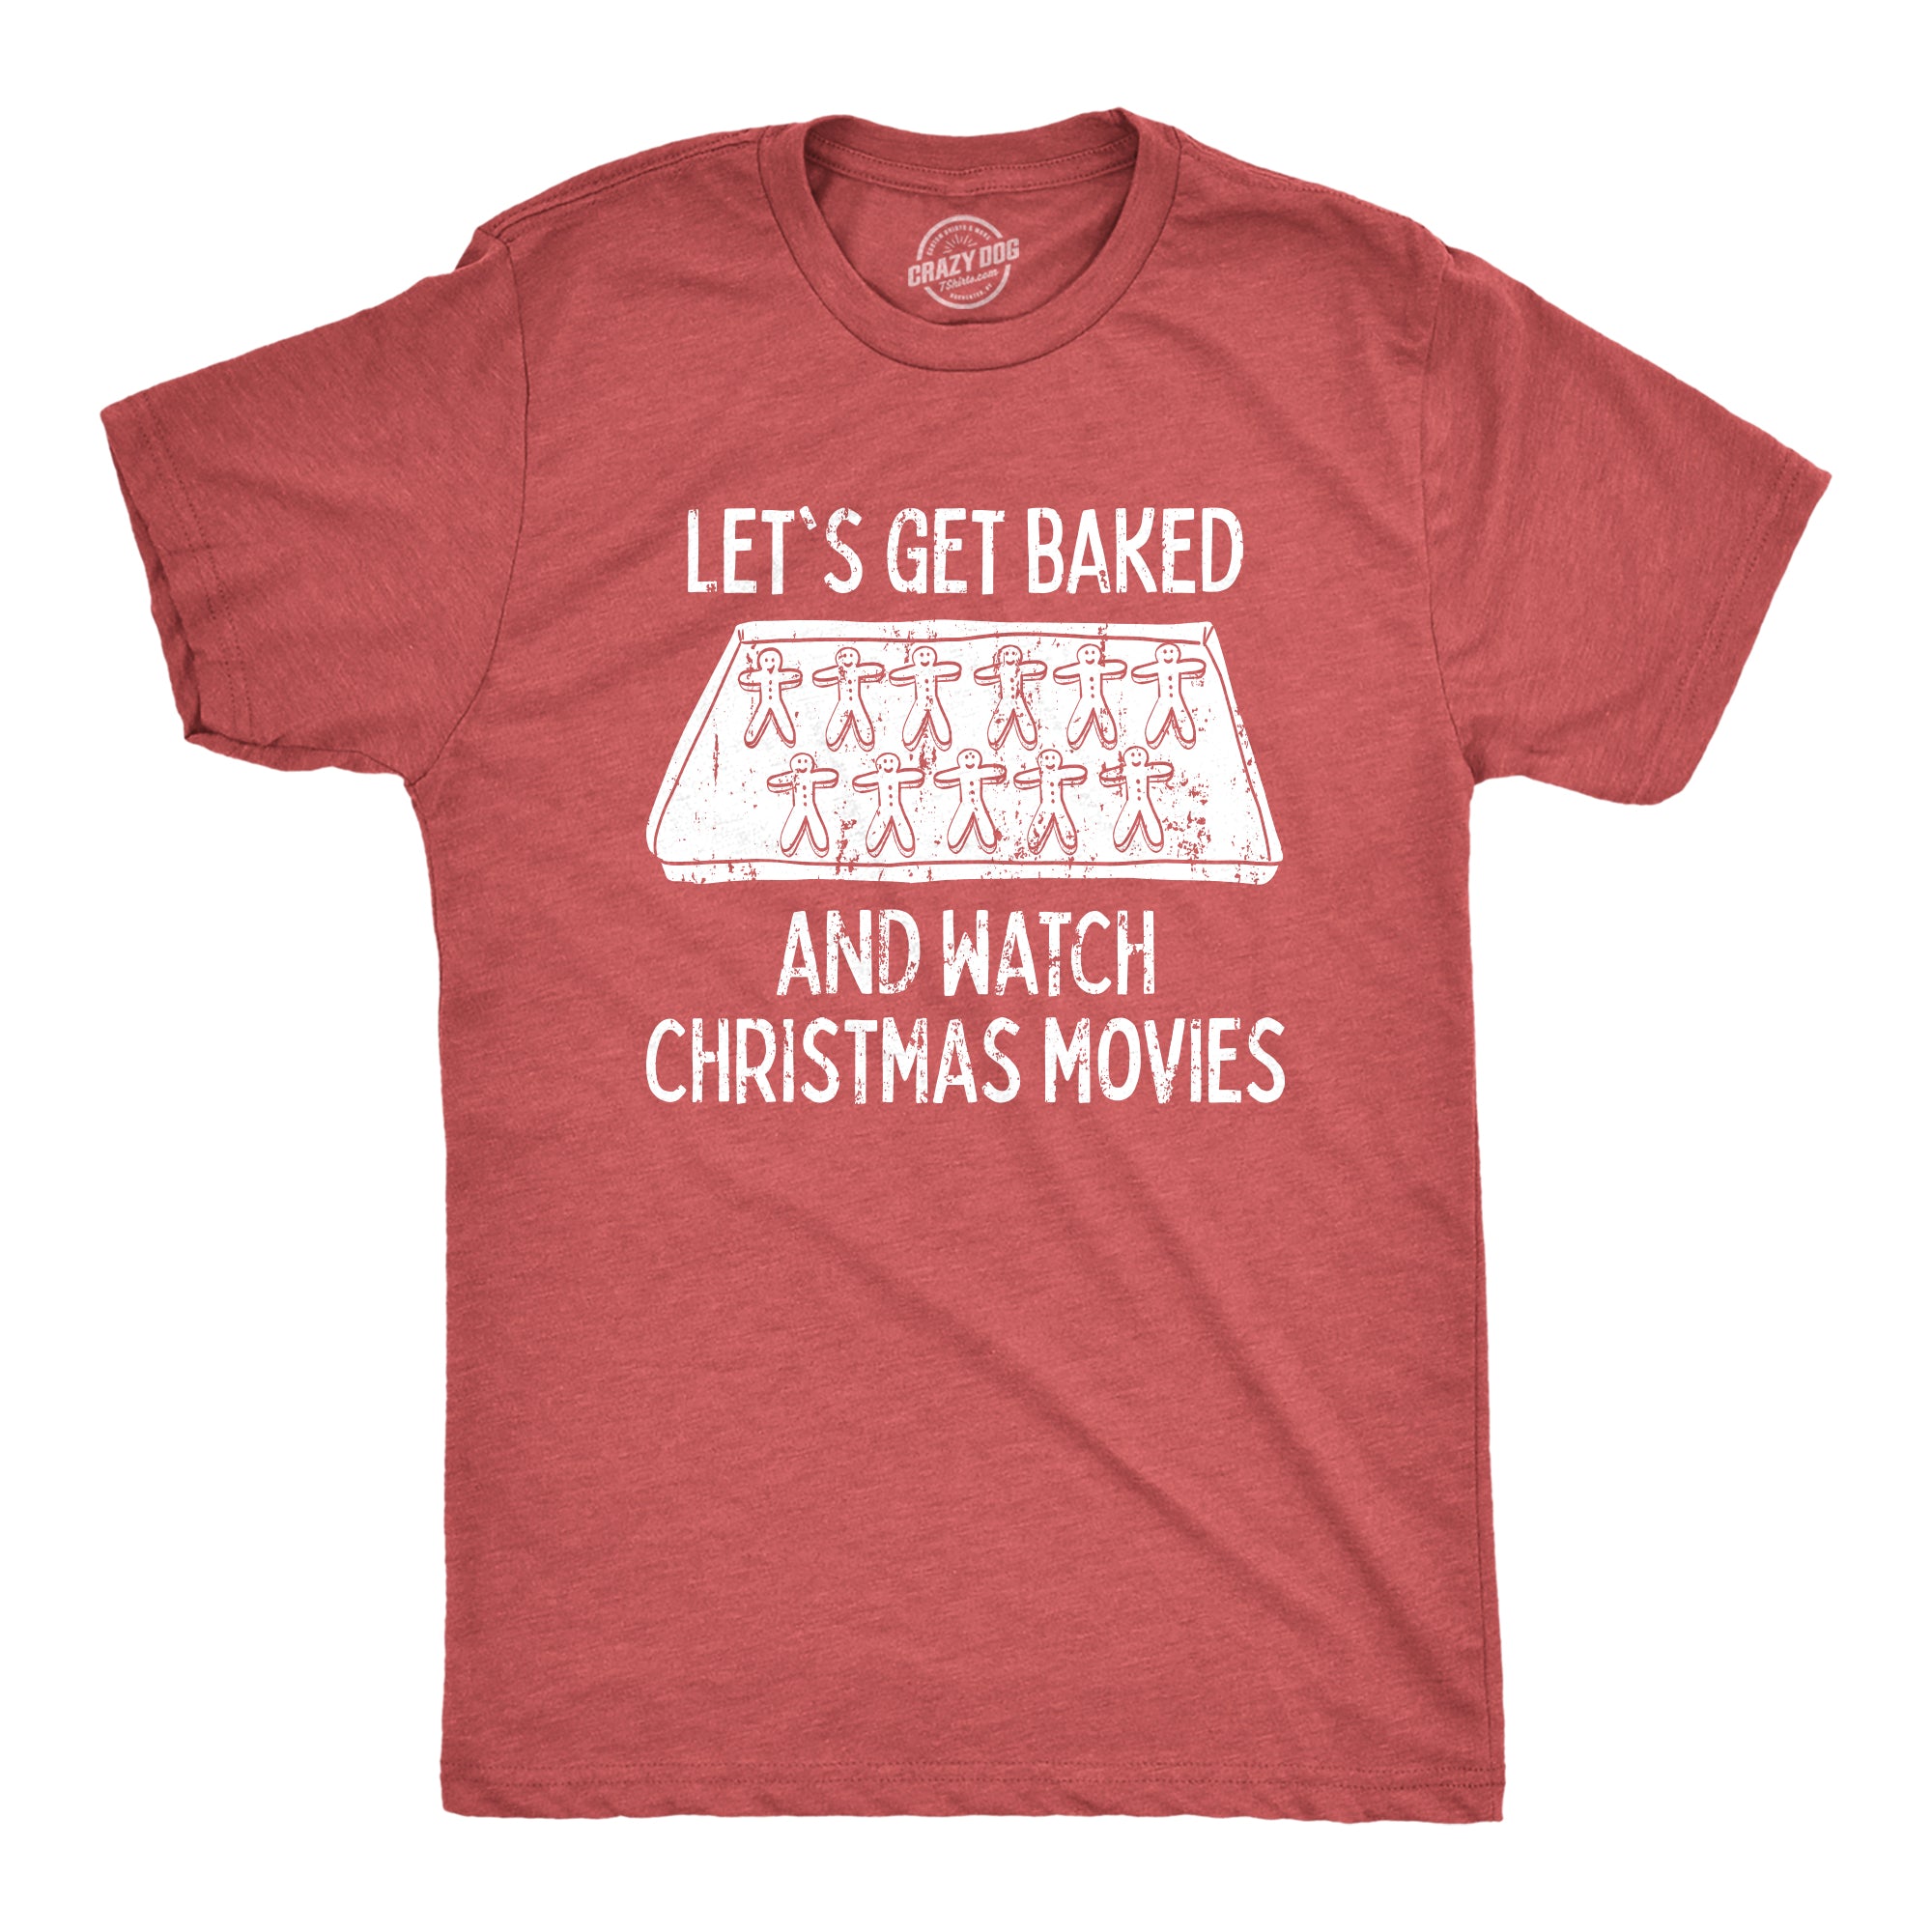 Funny Heather Red Let's Get Baked And Watch Christmas Movies Mens T Shirt Nerdy Christmas 420 Food Tee